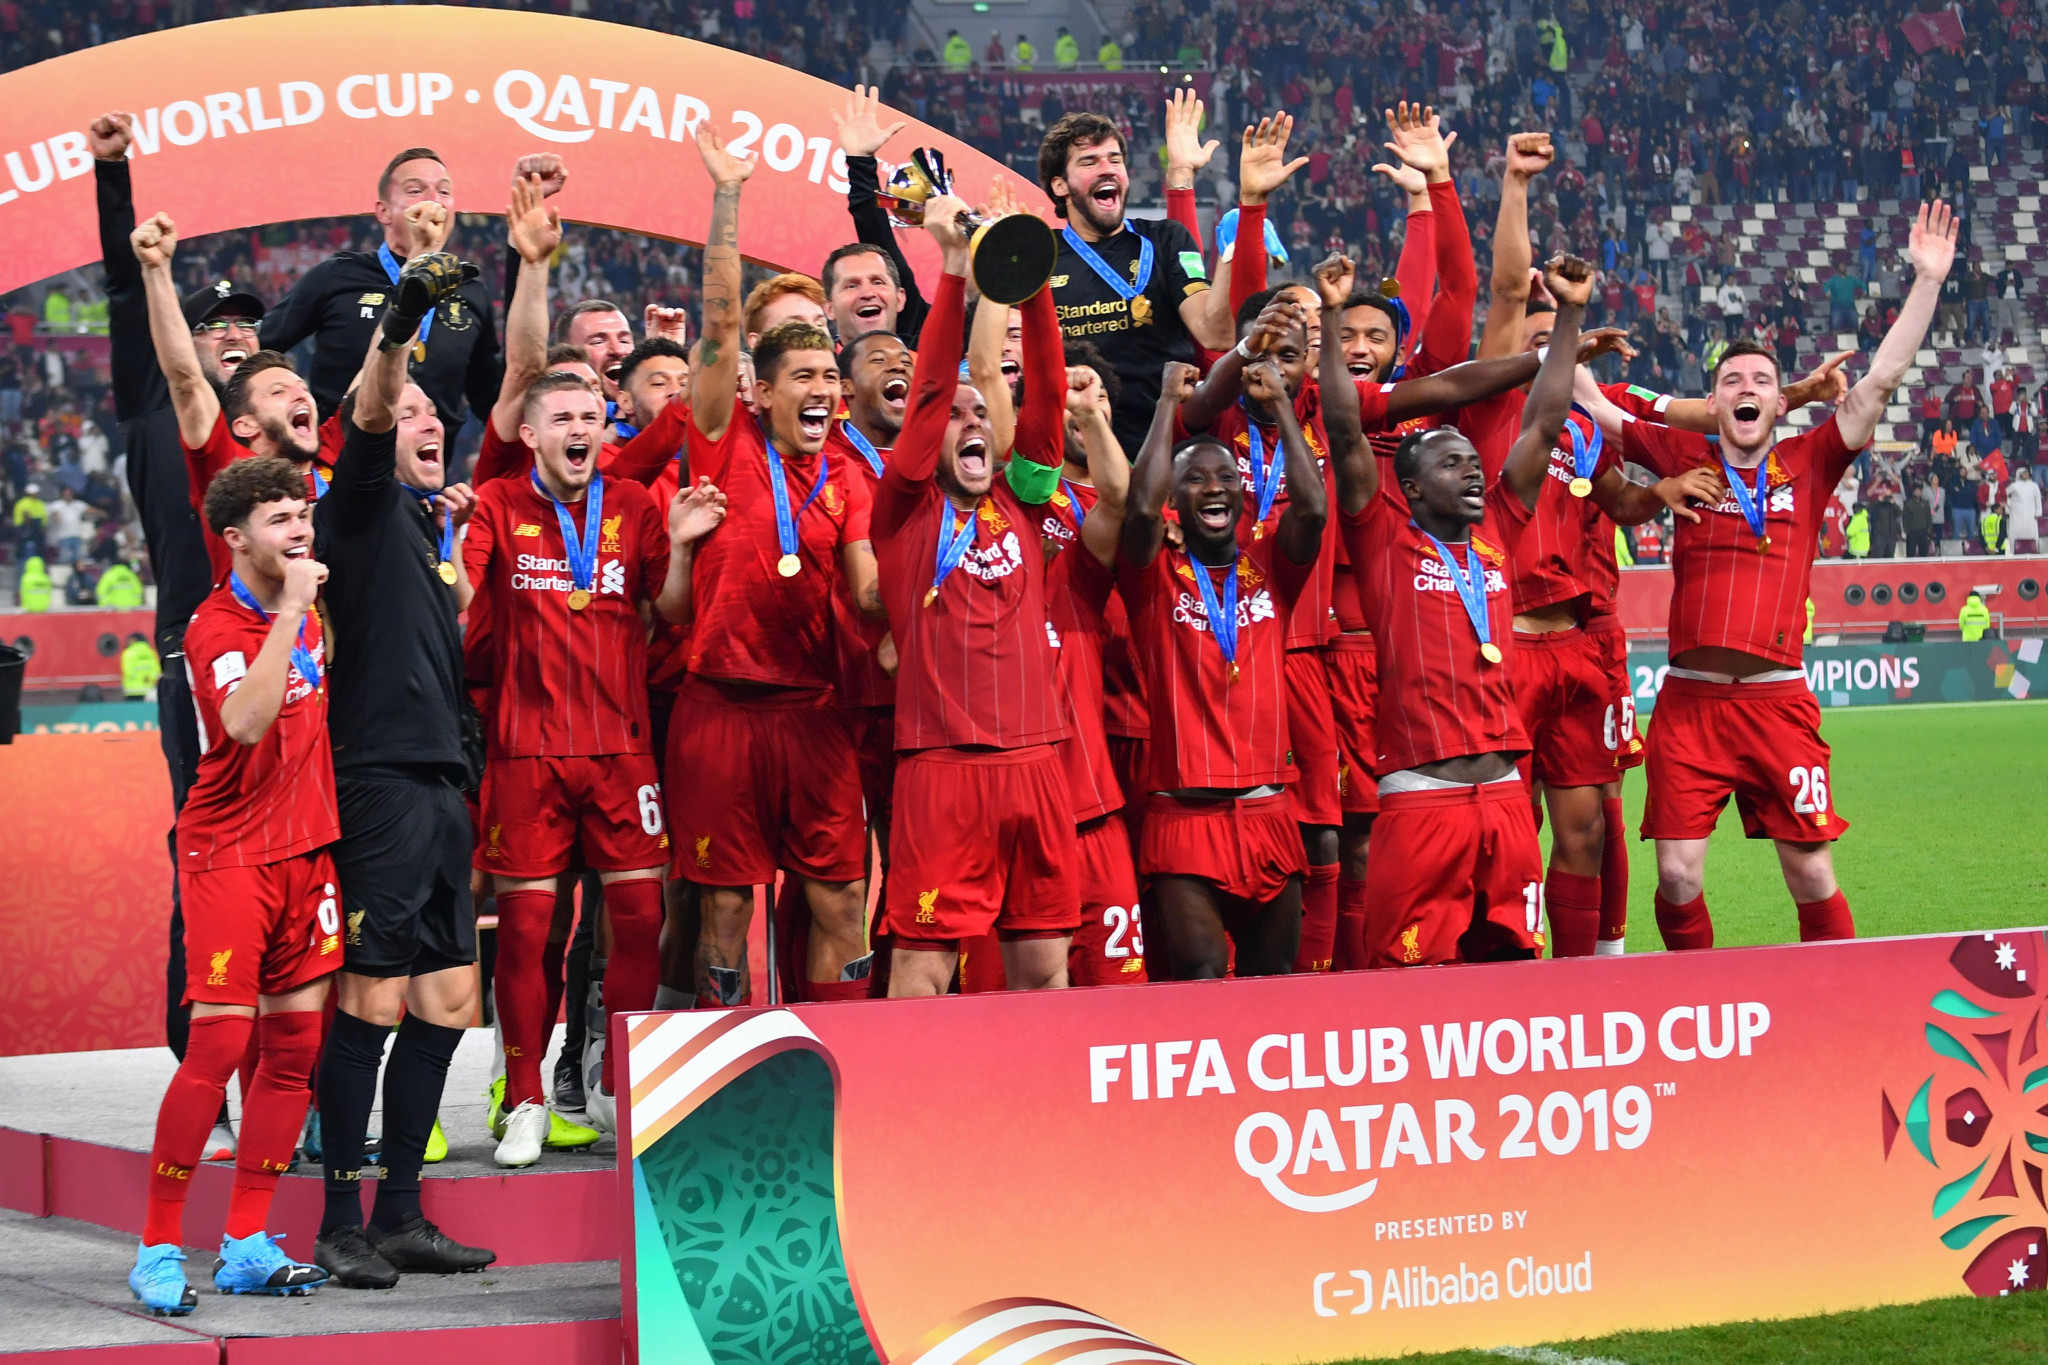 FIFA reschedules Club World Cup and cancels women's age group tournaments